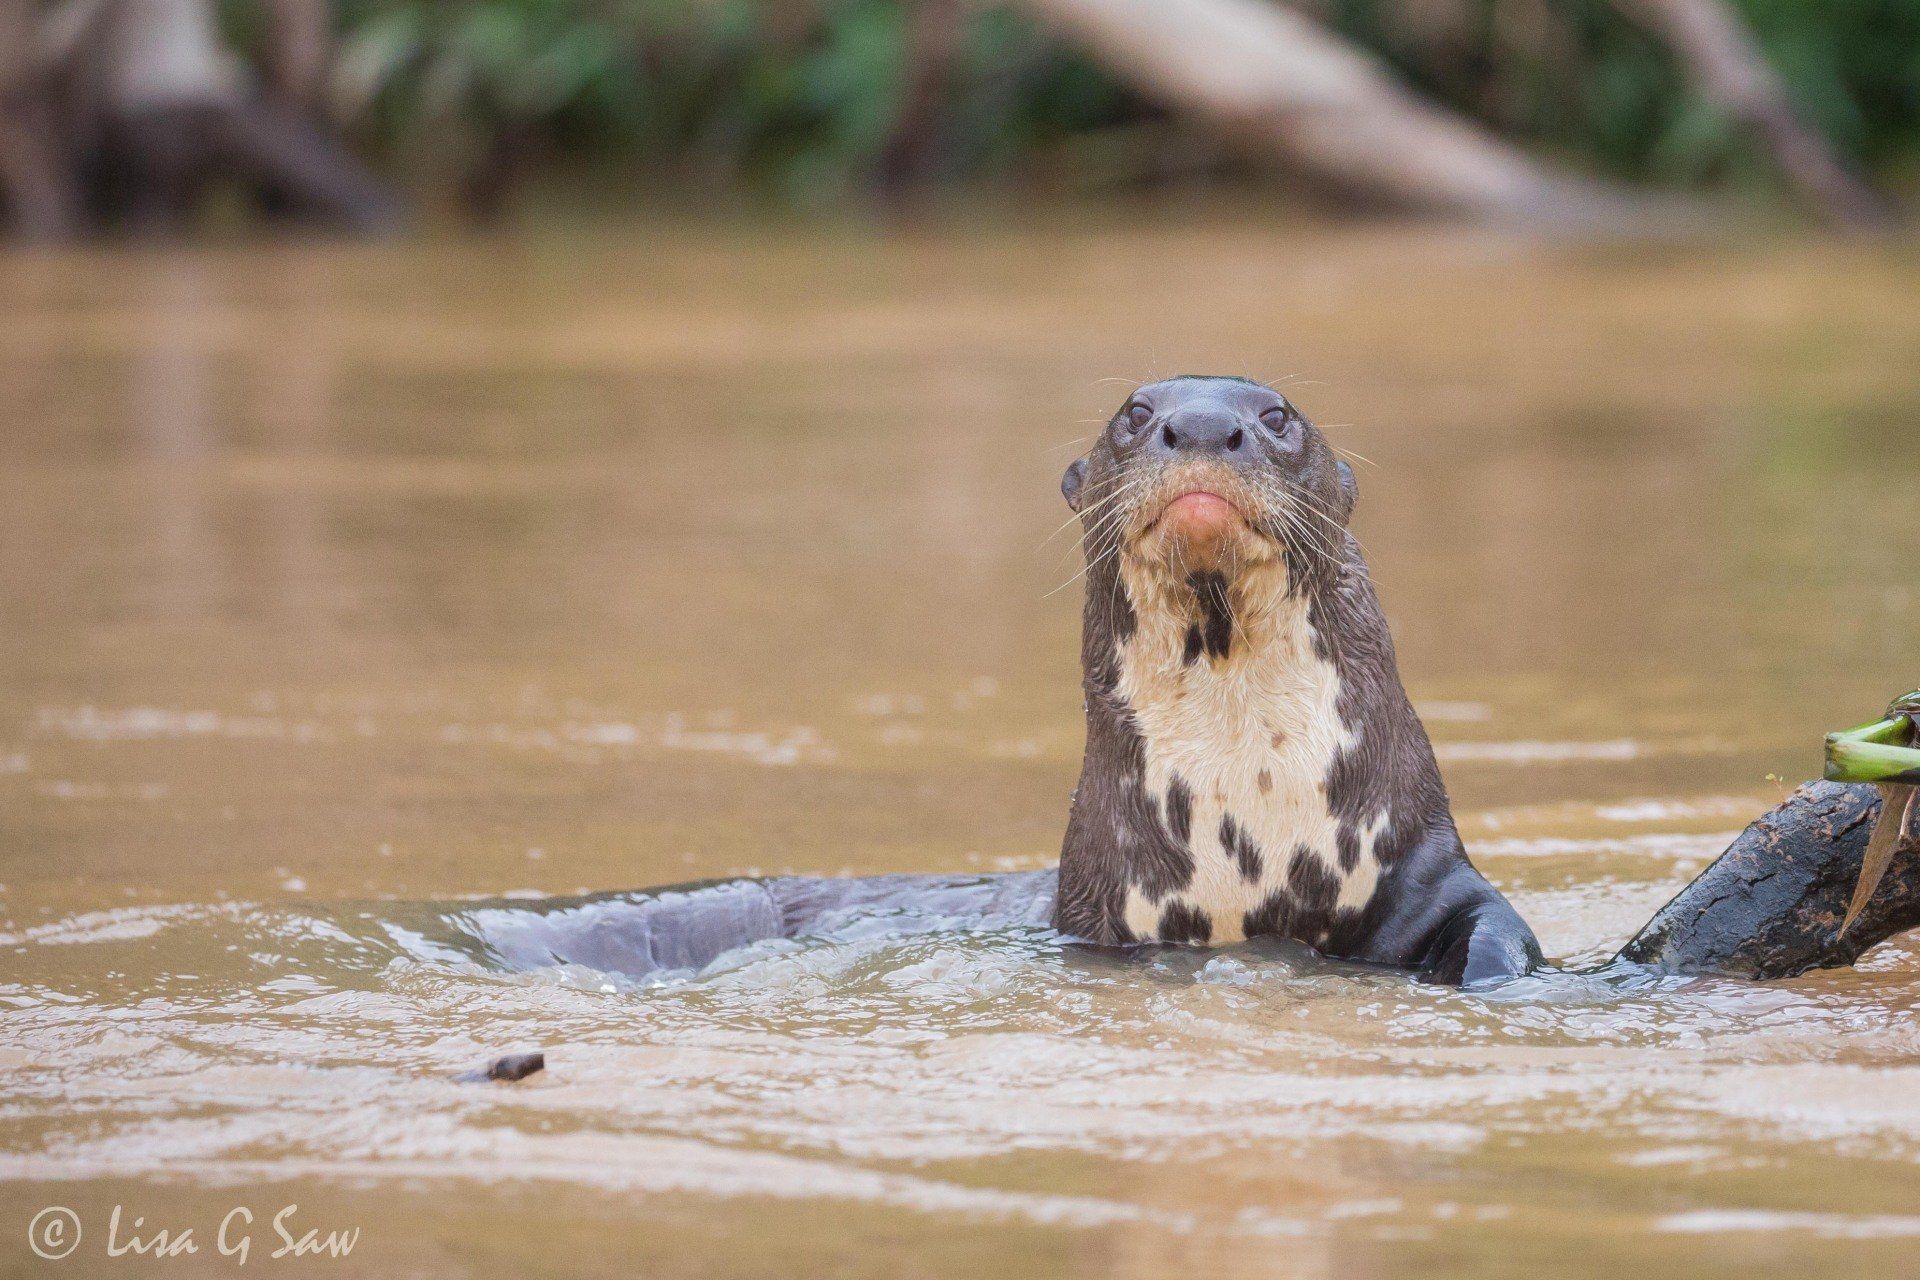 Giant River Otter with head out of water